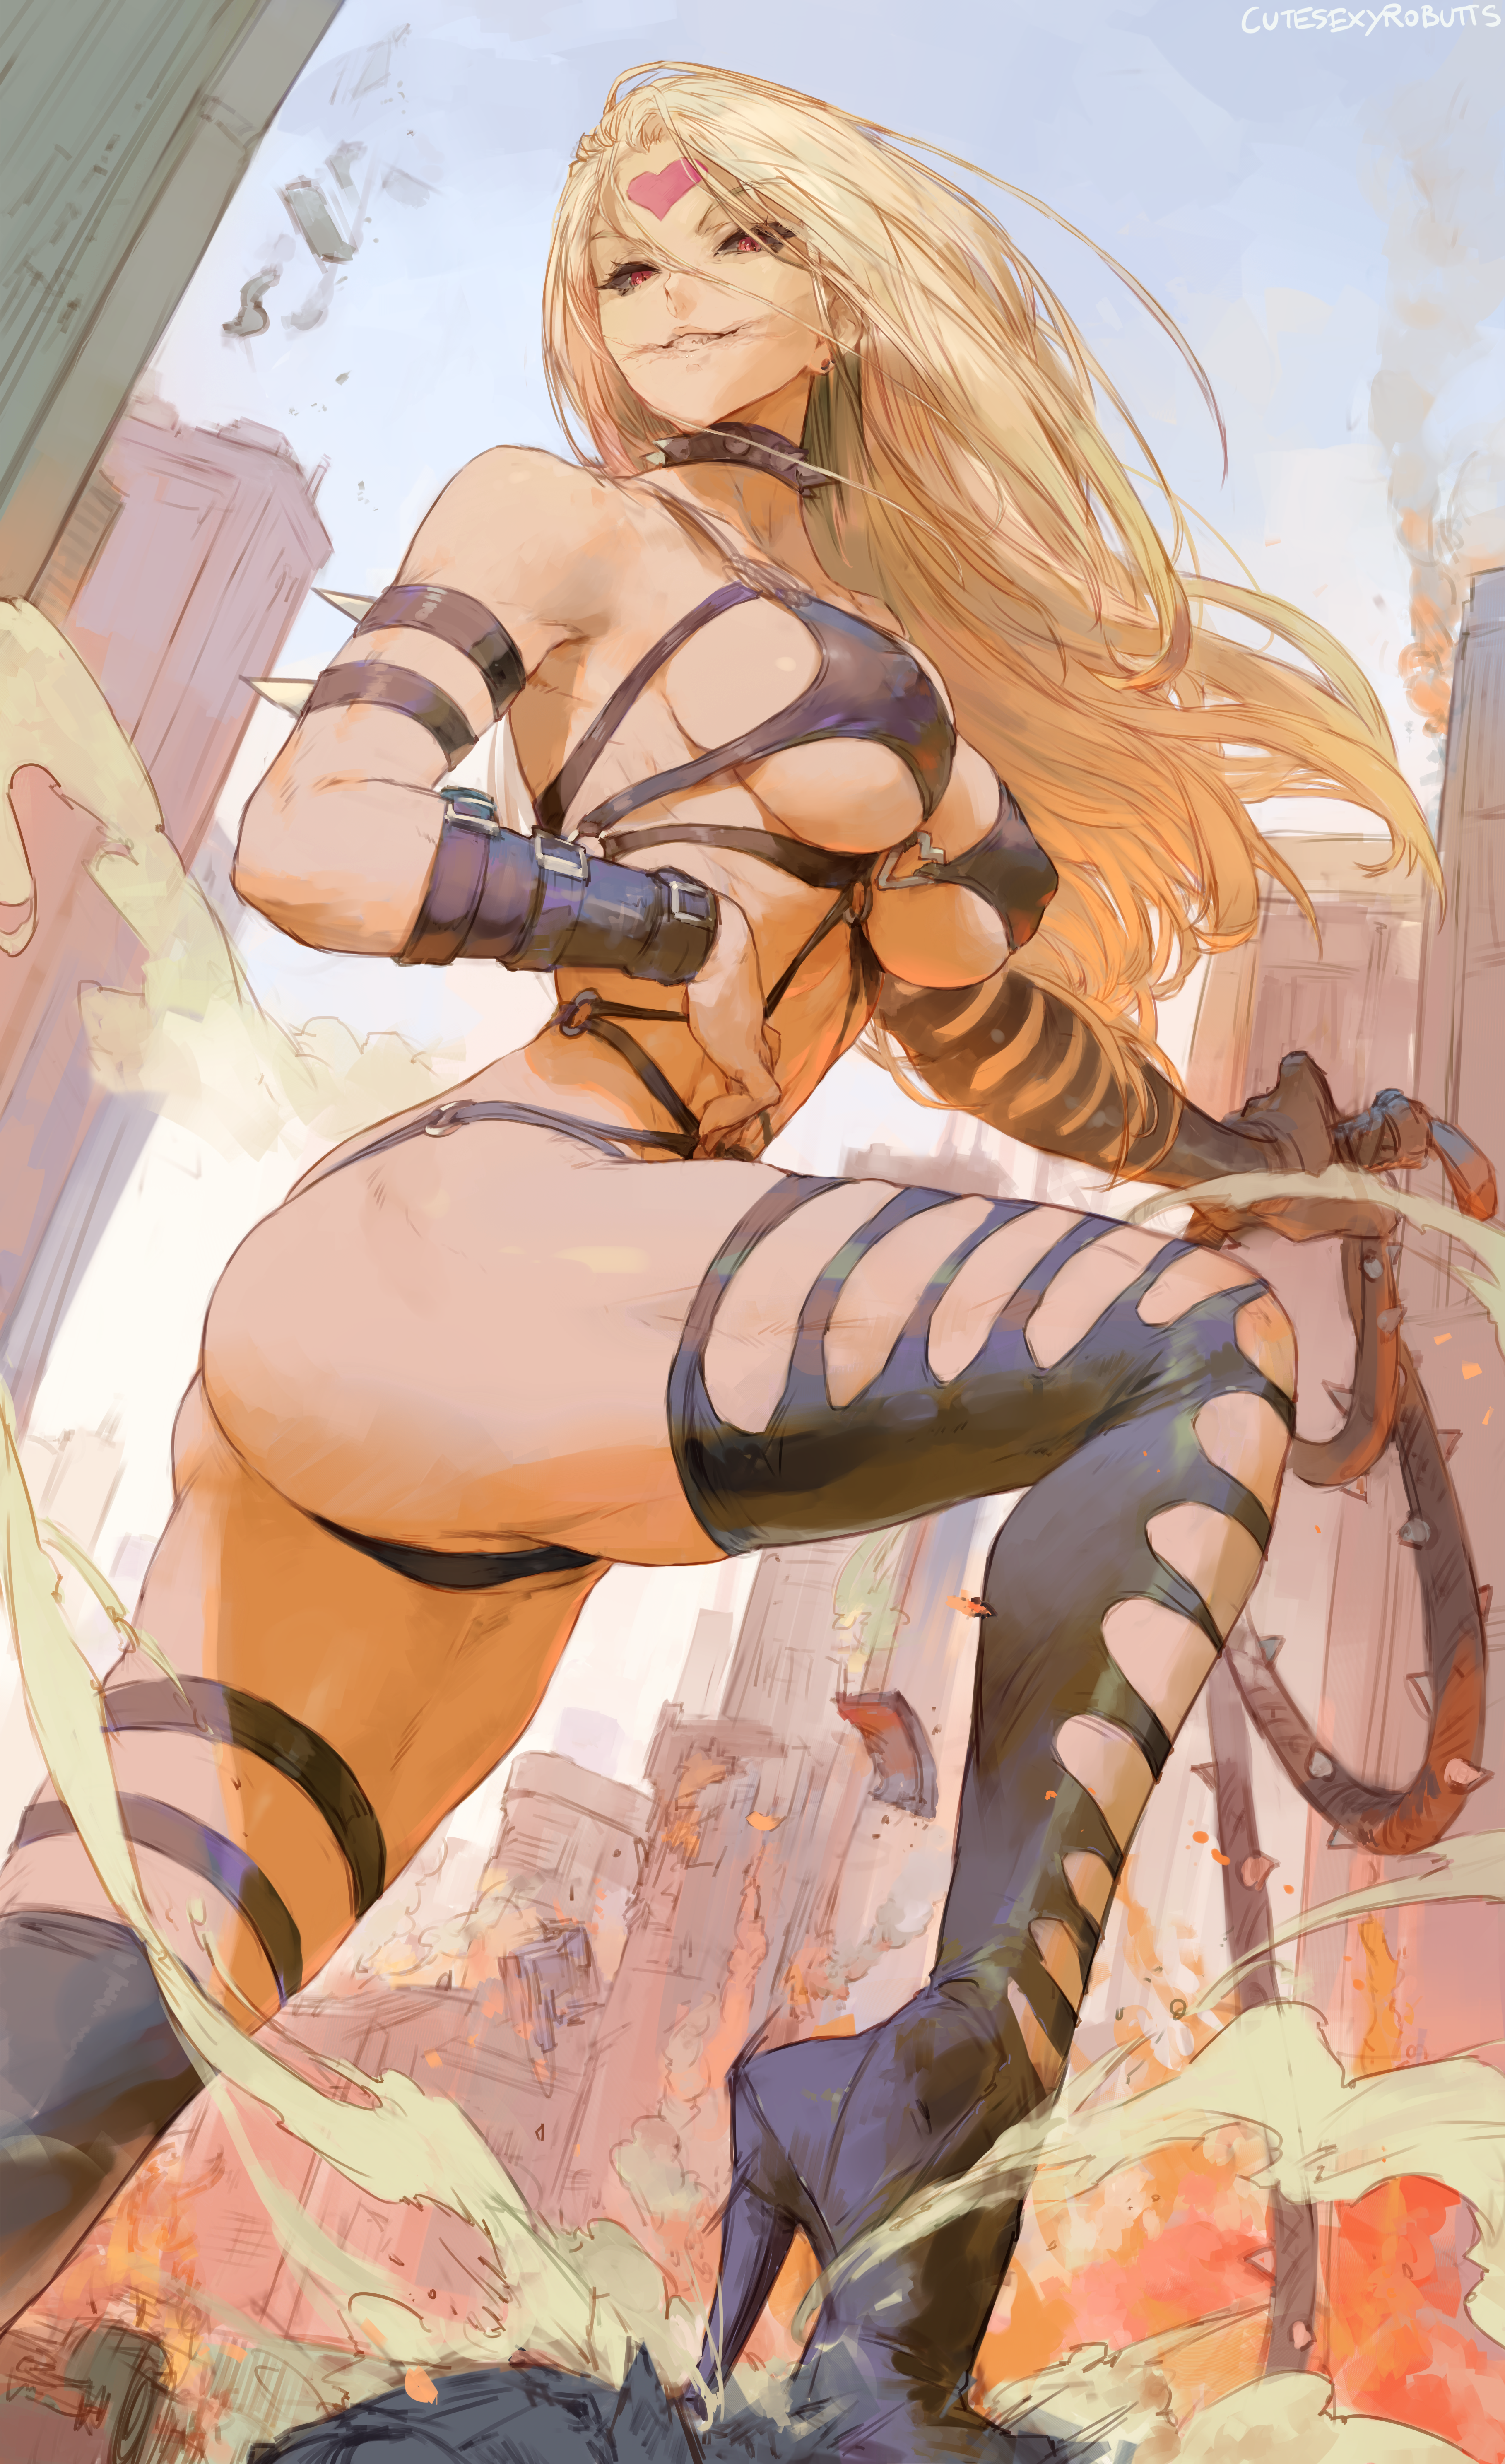 Anime 3635x5950 Do-S One-Punch Man anime anime girls curvy BDSM whips blonde underboob ass artwork drawing fan art Cutesexyrobutts thick thigh